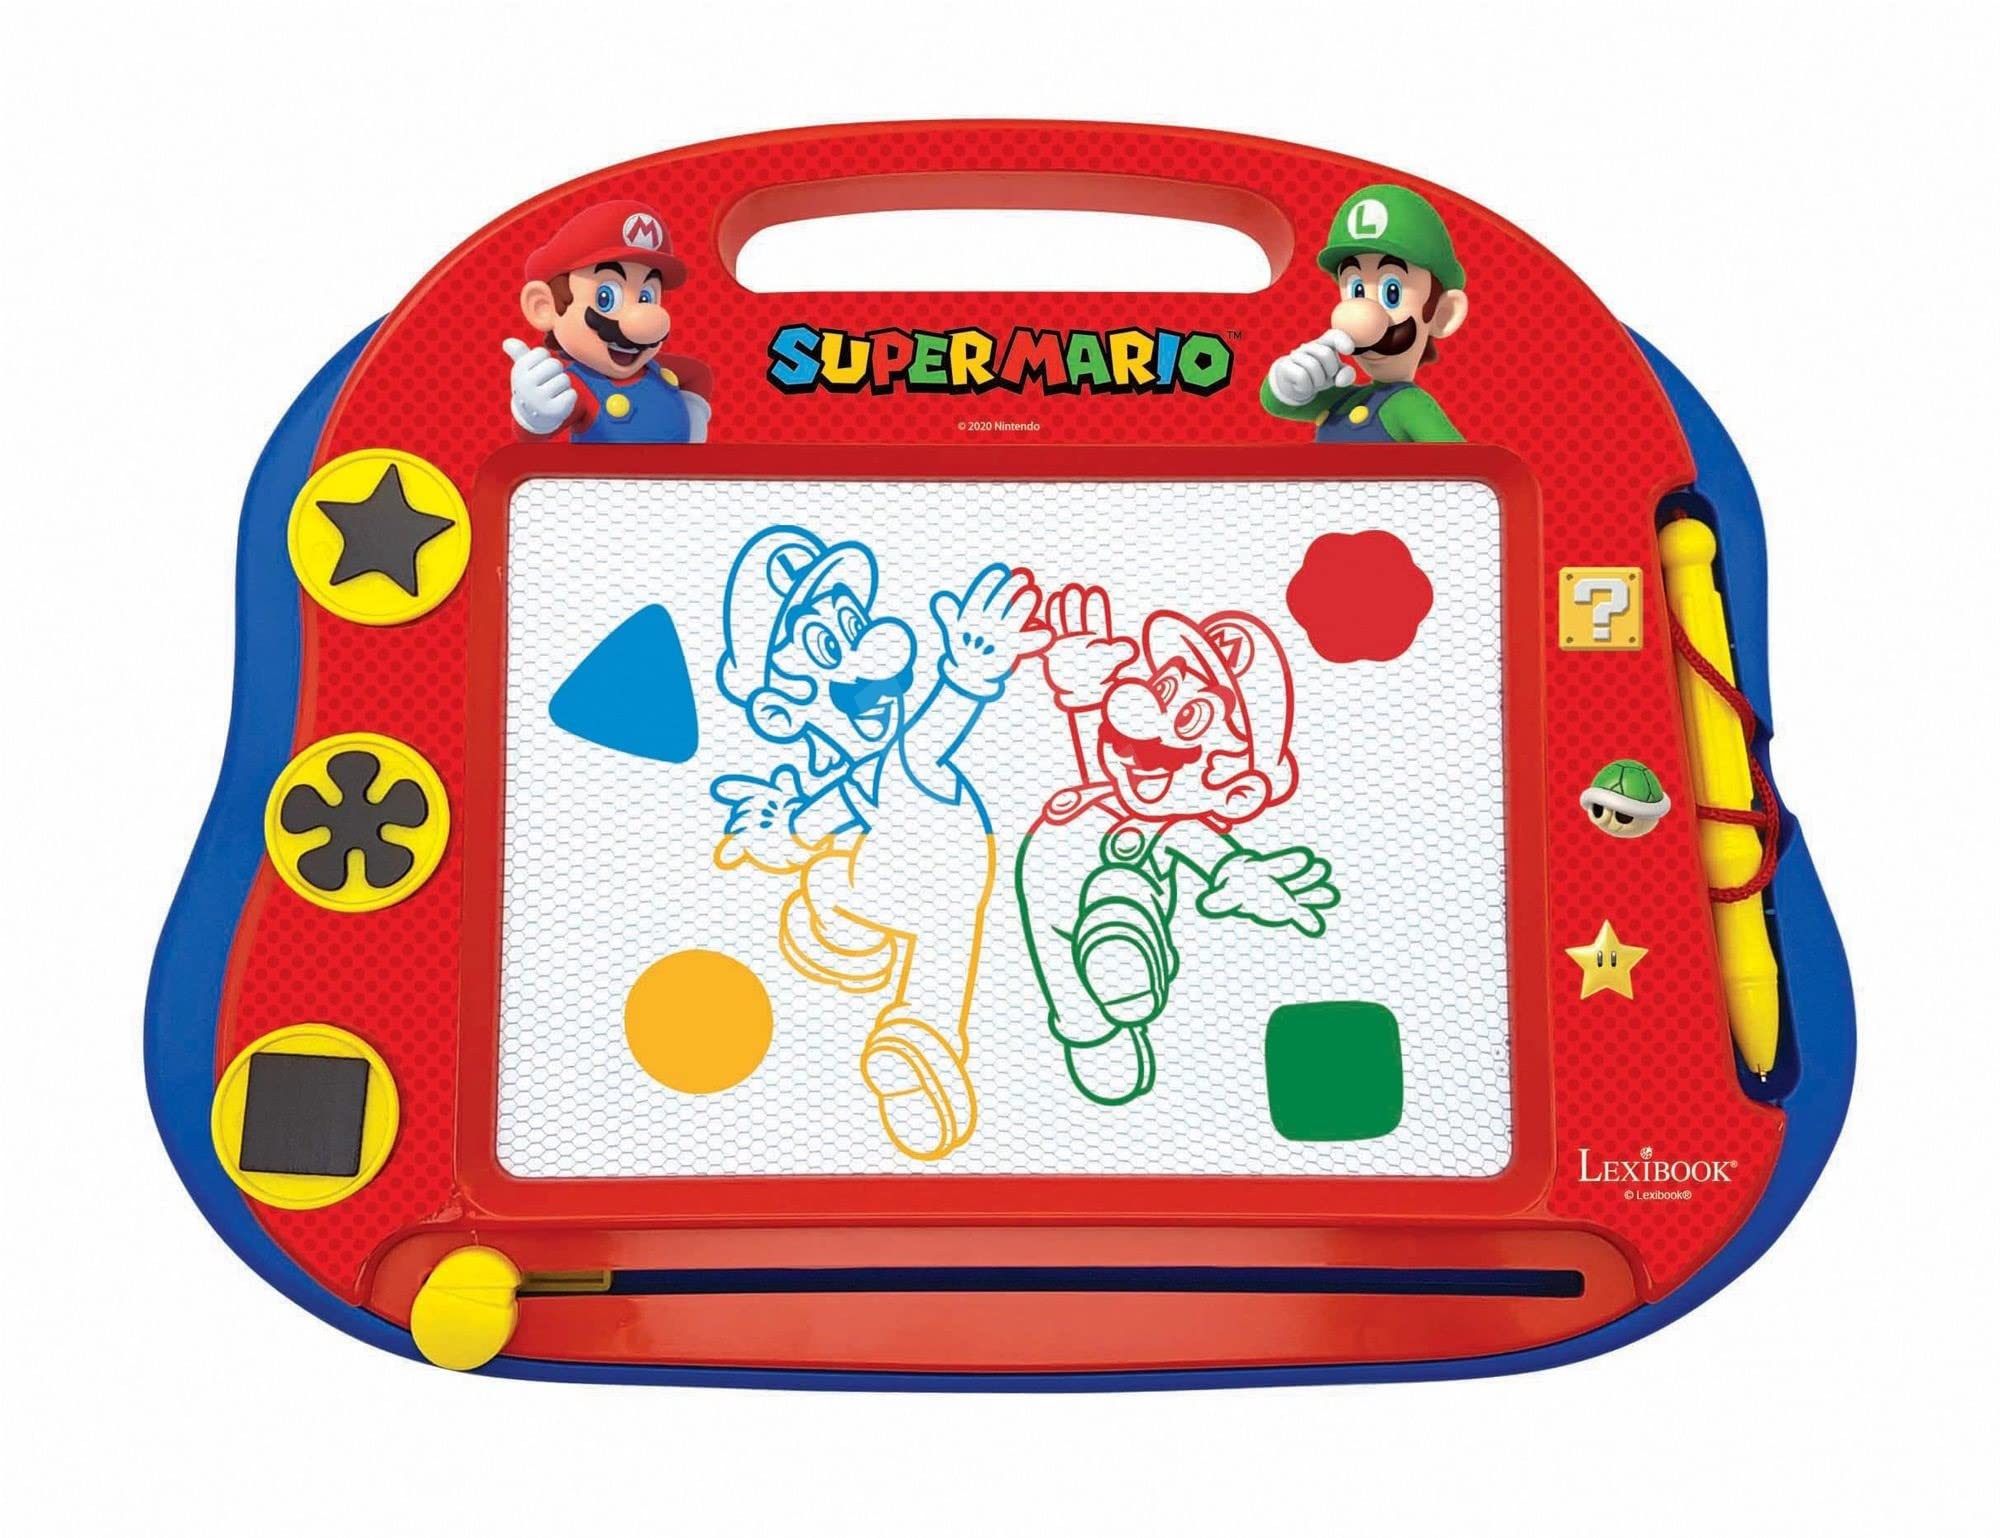 Lexibook CRNI550 Super Mario Brothers Multicolor Magic Magnetic Nintendo Drawing Board, Artistic Creative Toy for Girls and Boys, Stylus Pen and Stamps, Red/Blue